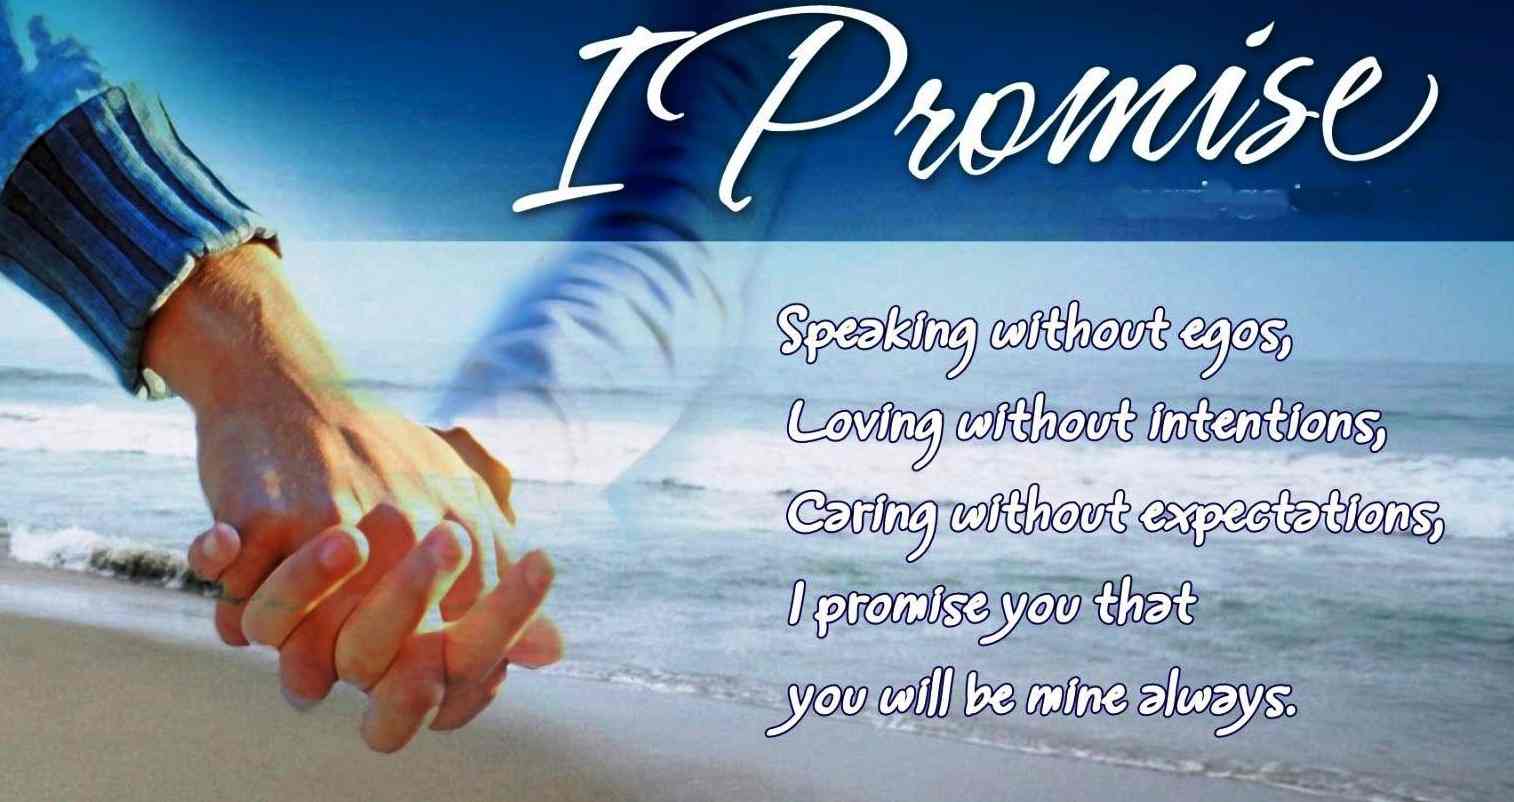 happy promise day sms 2016